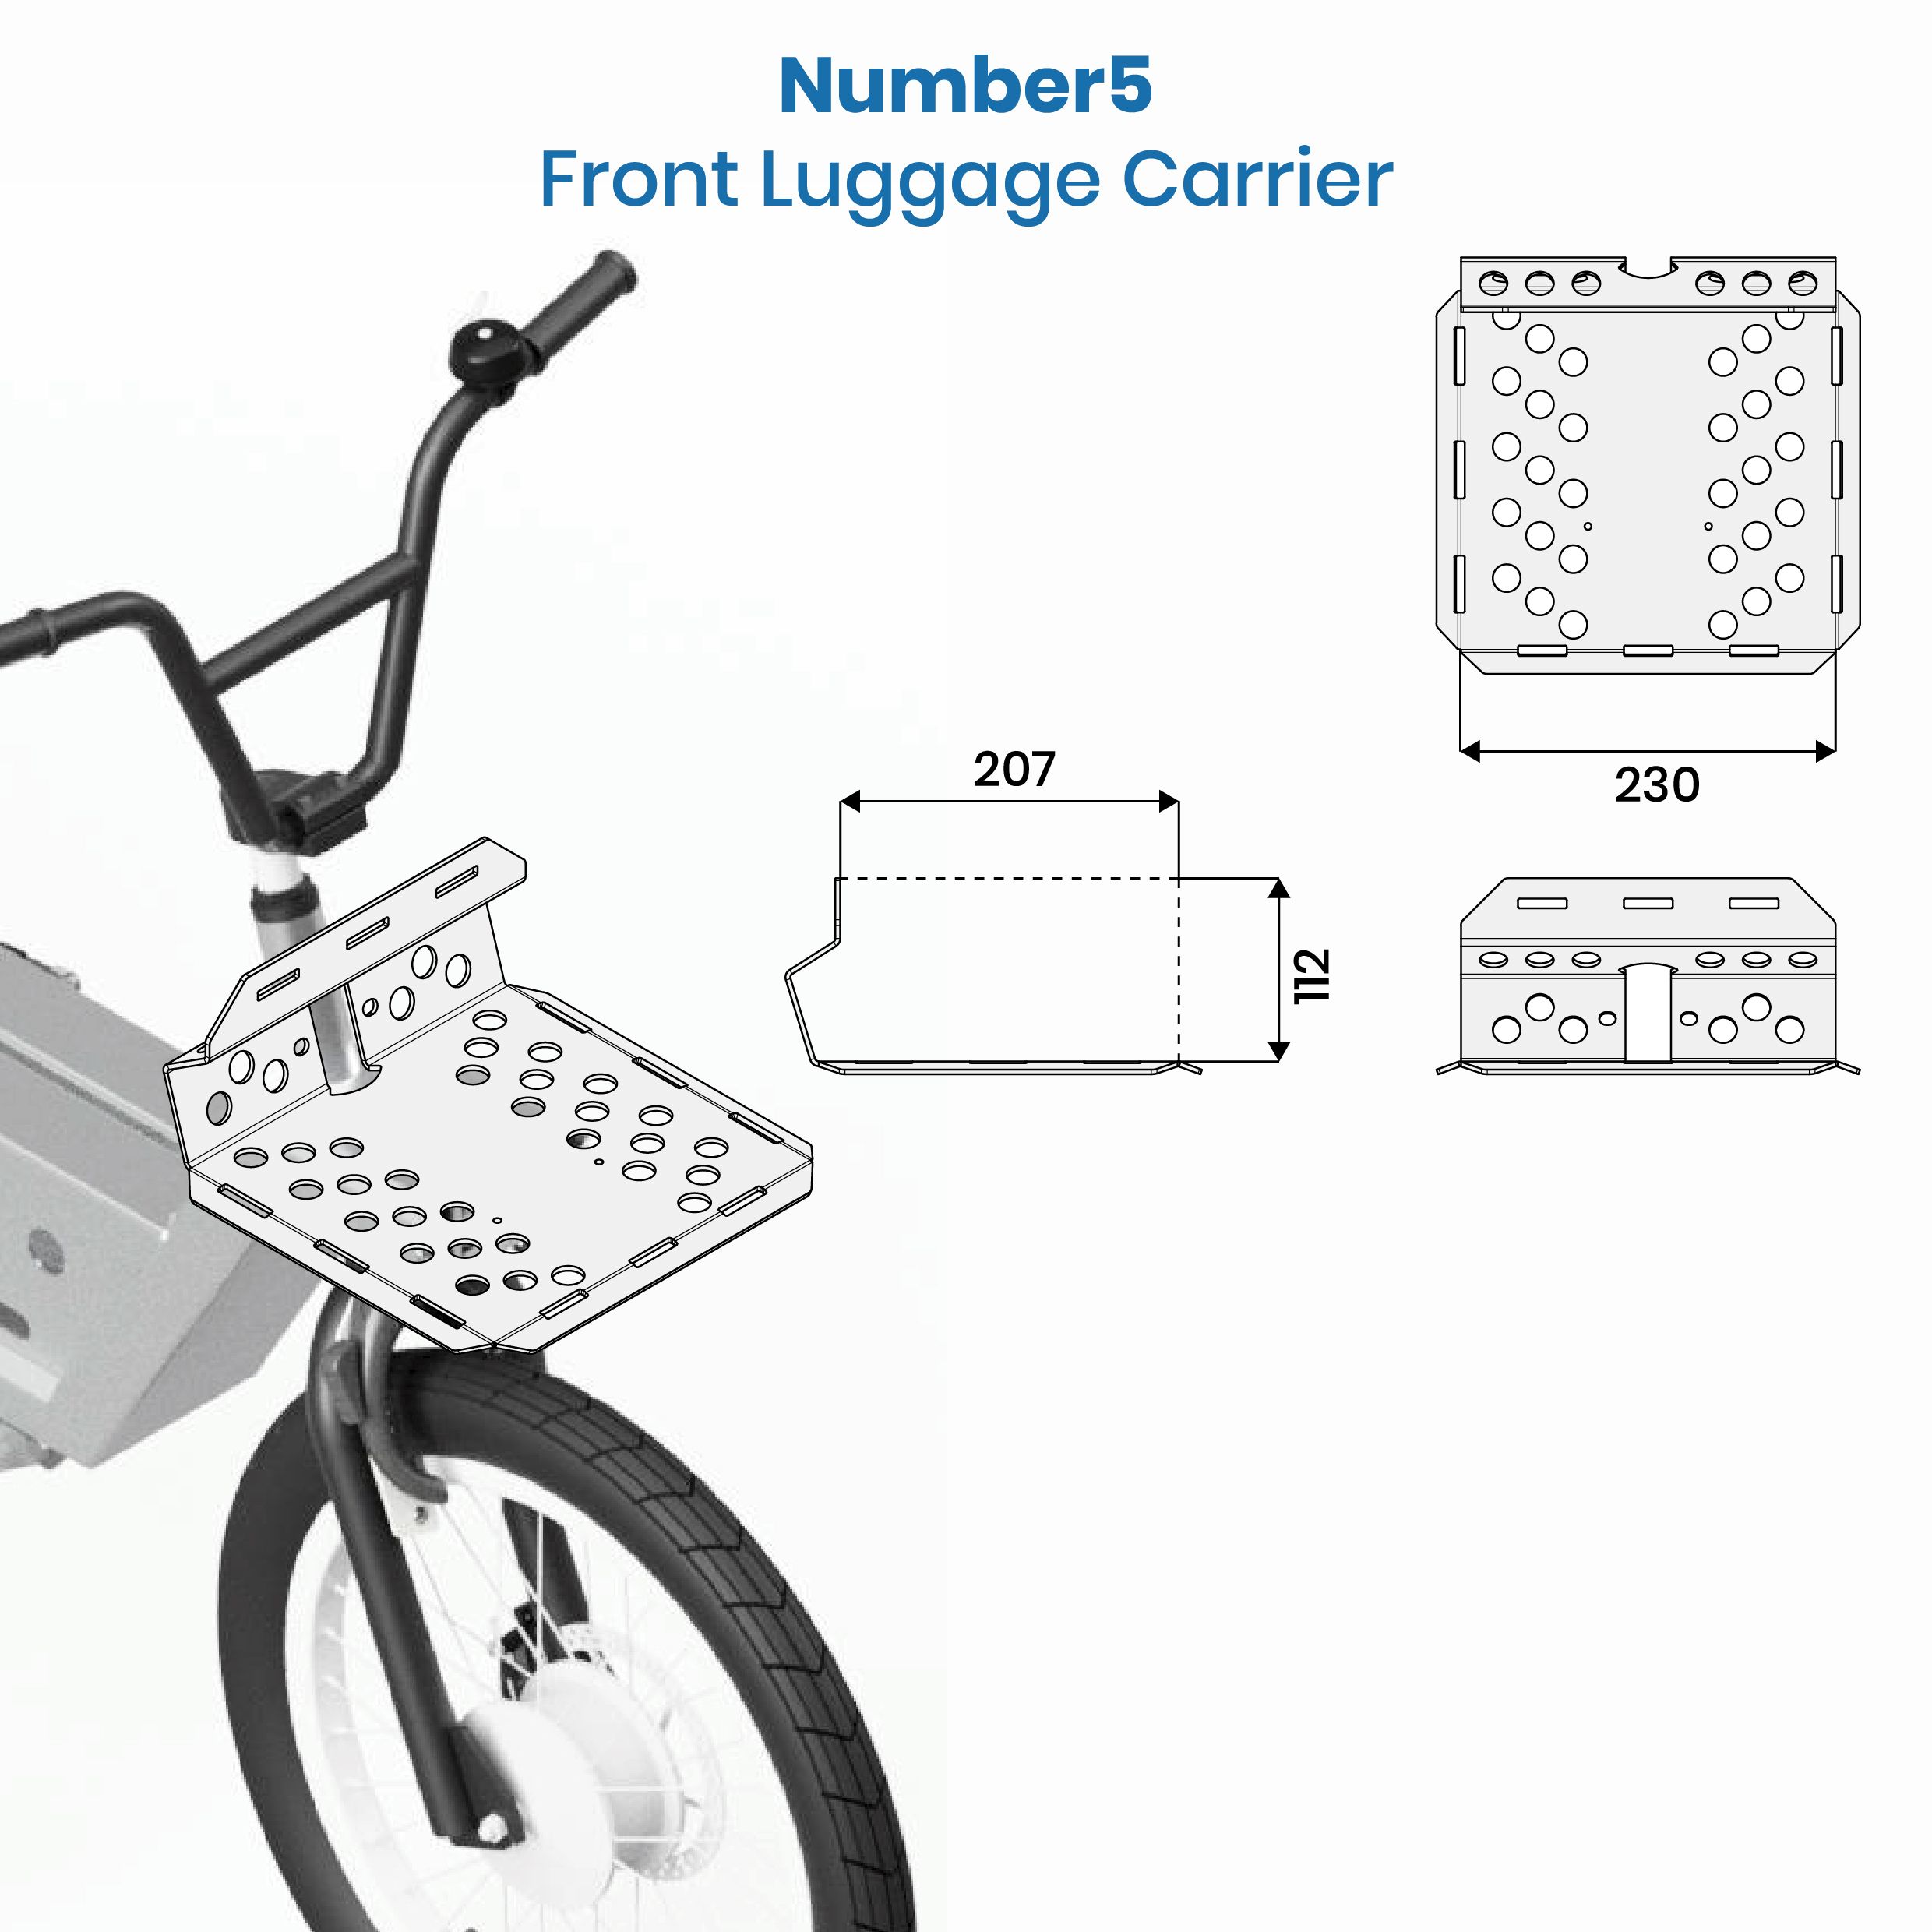 Front luggage carrier